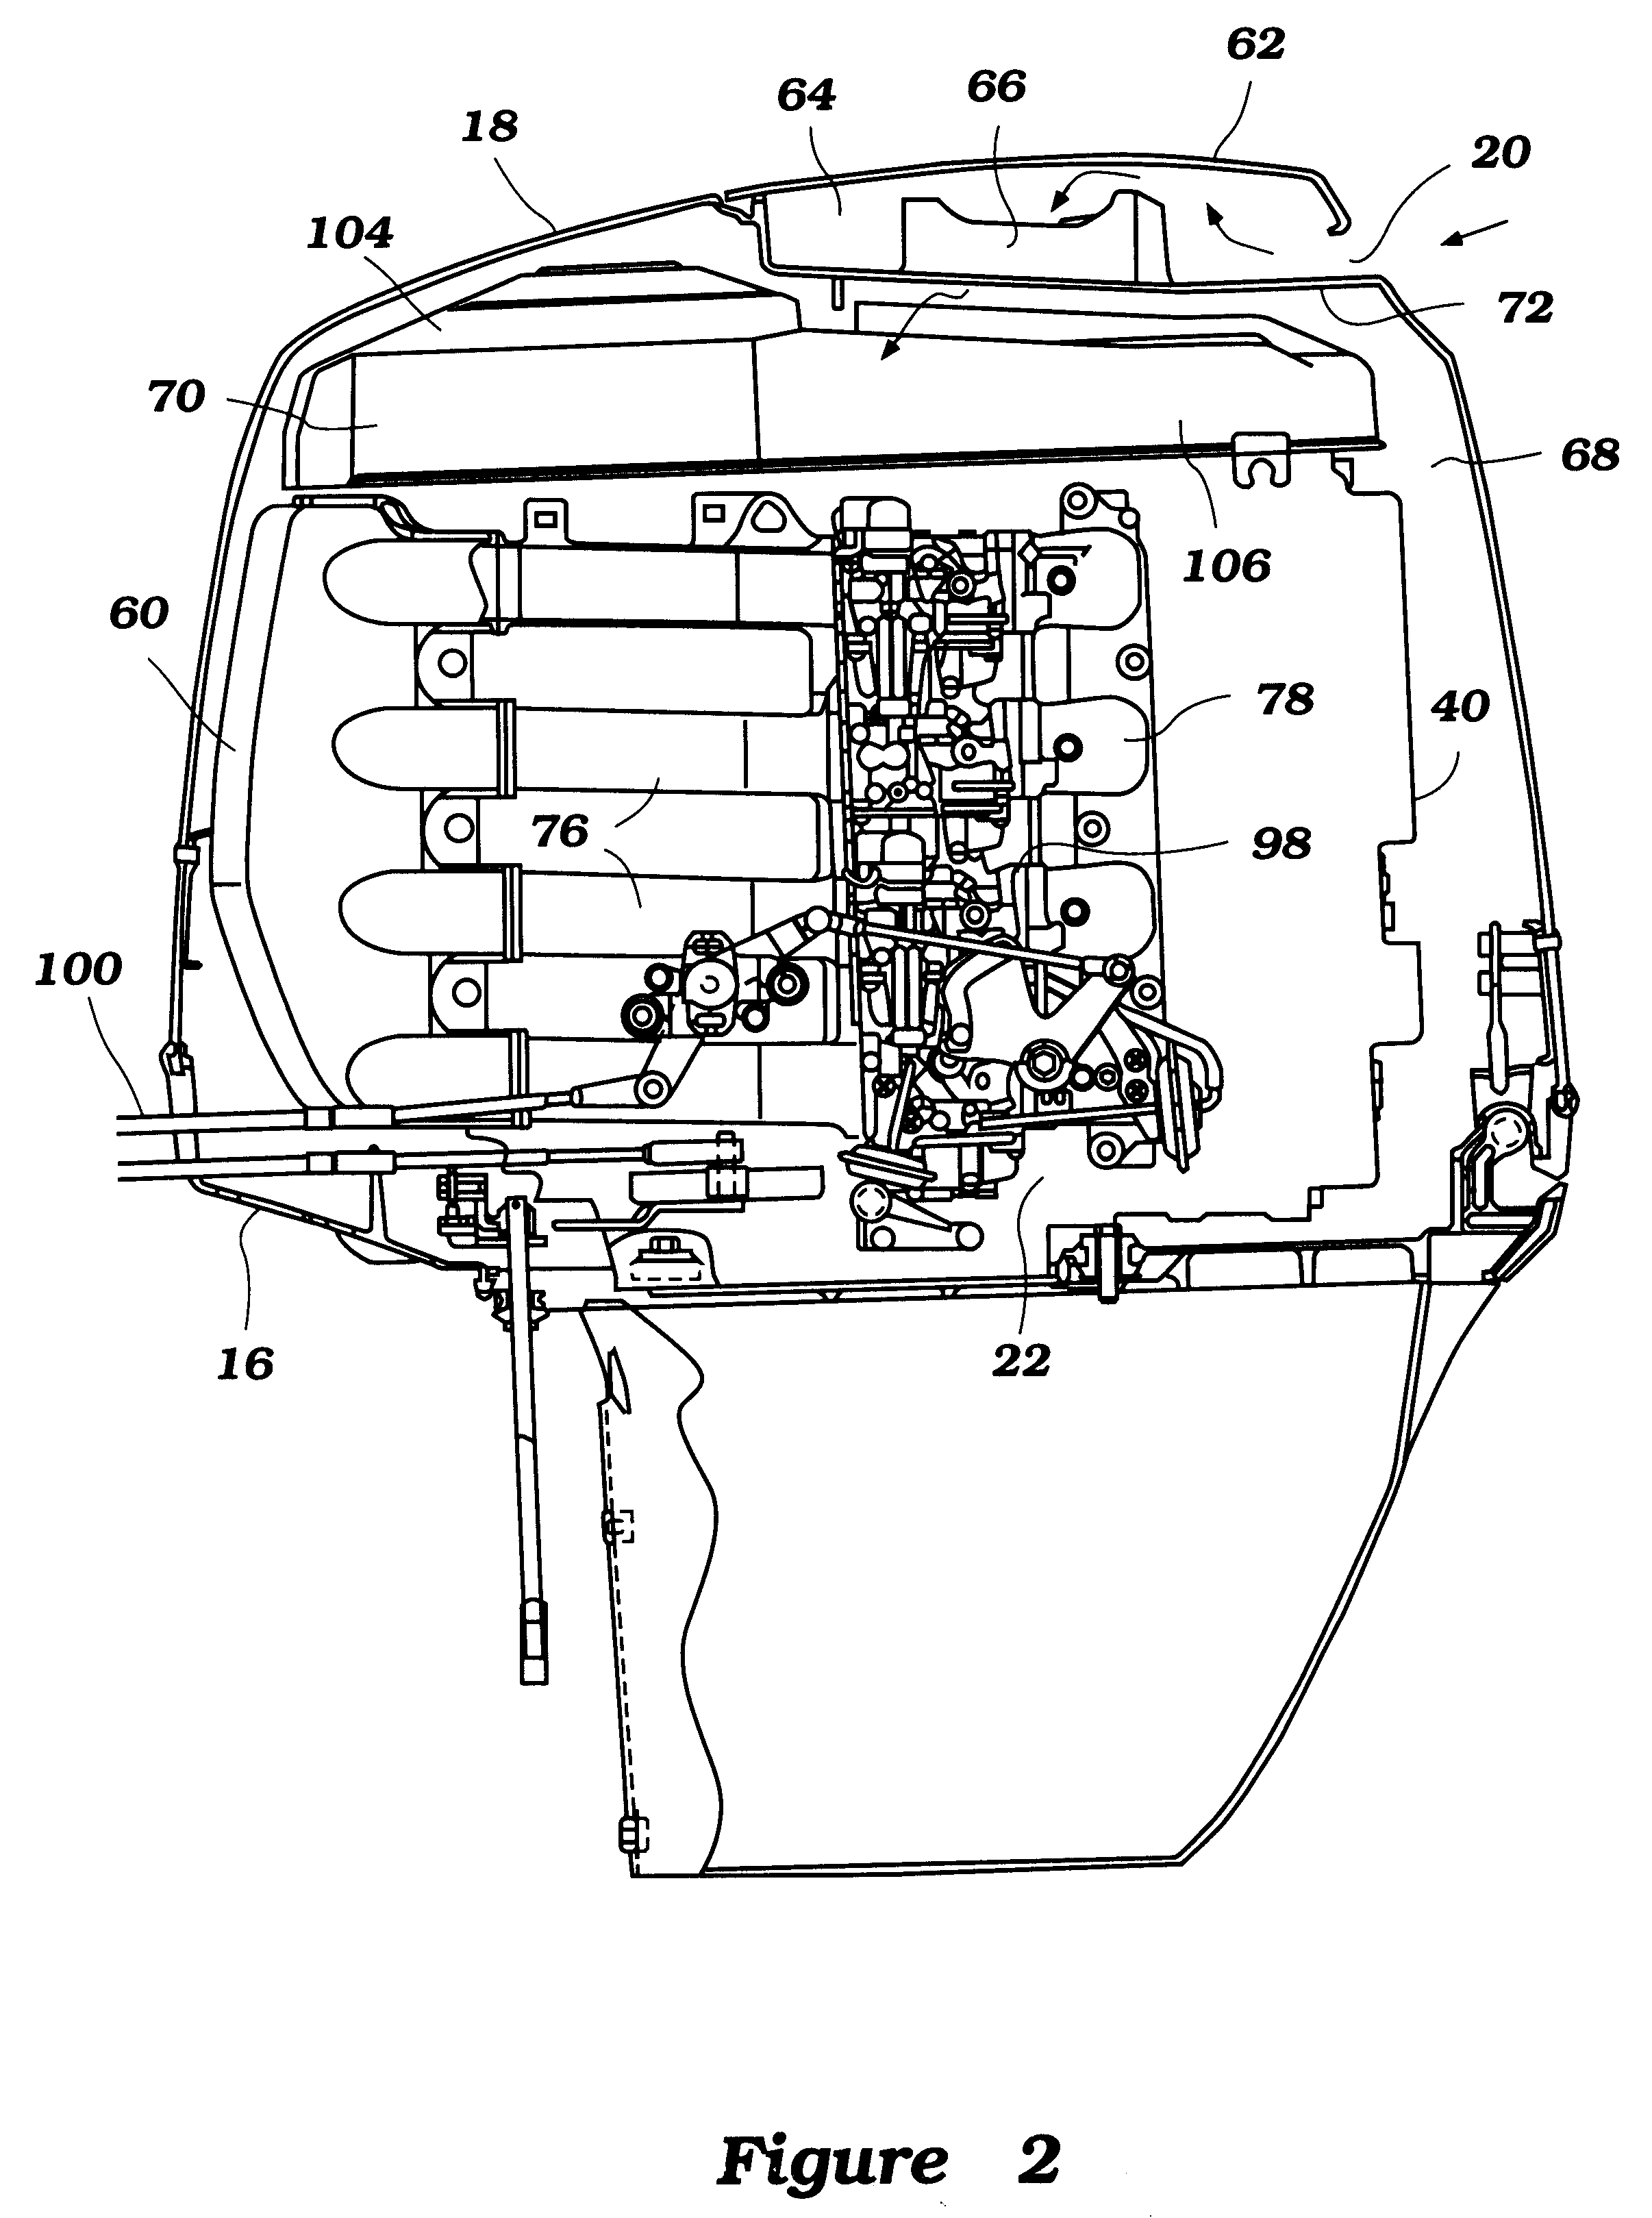 Cowling arrangement for outboard motor